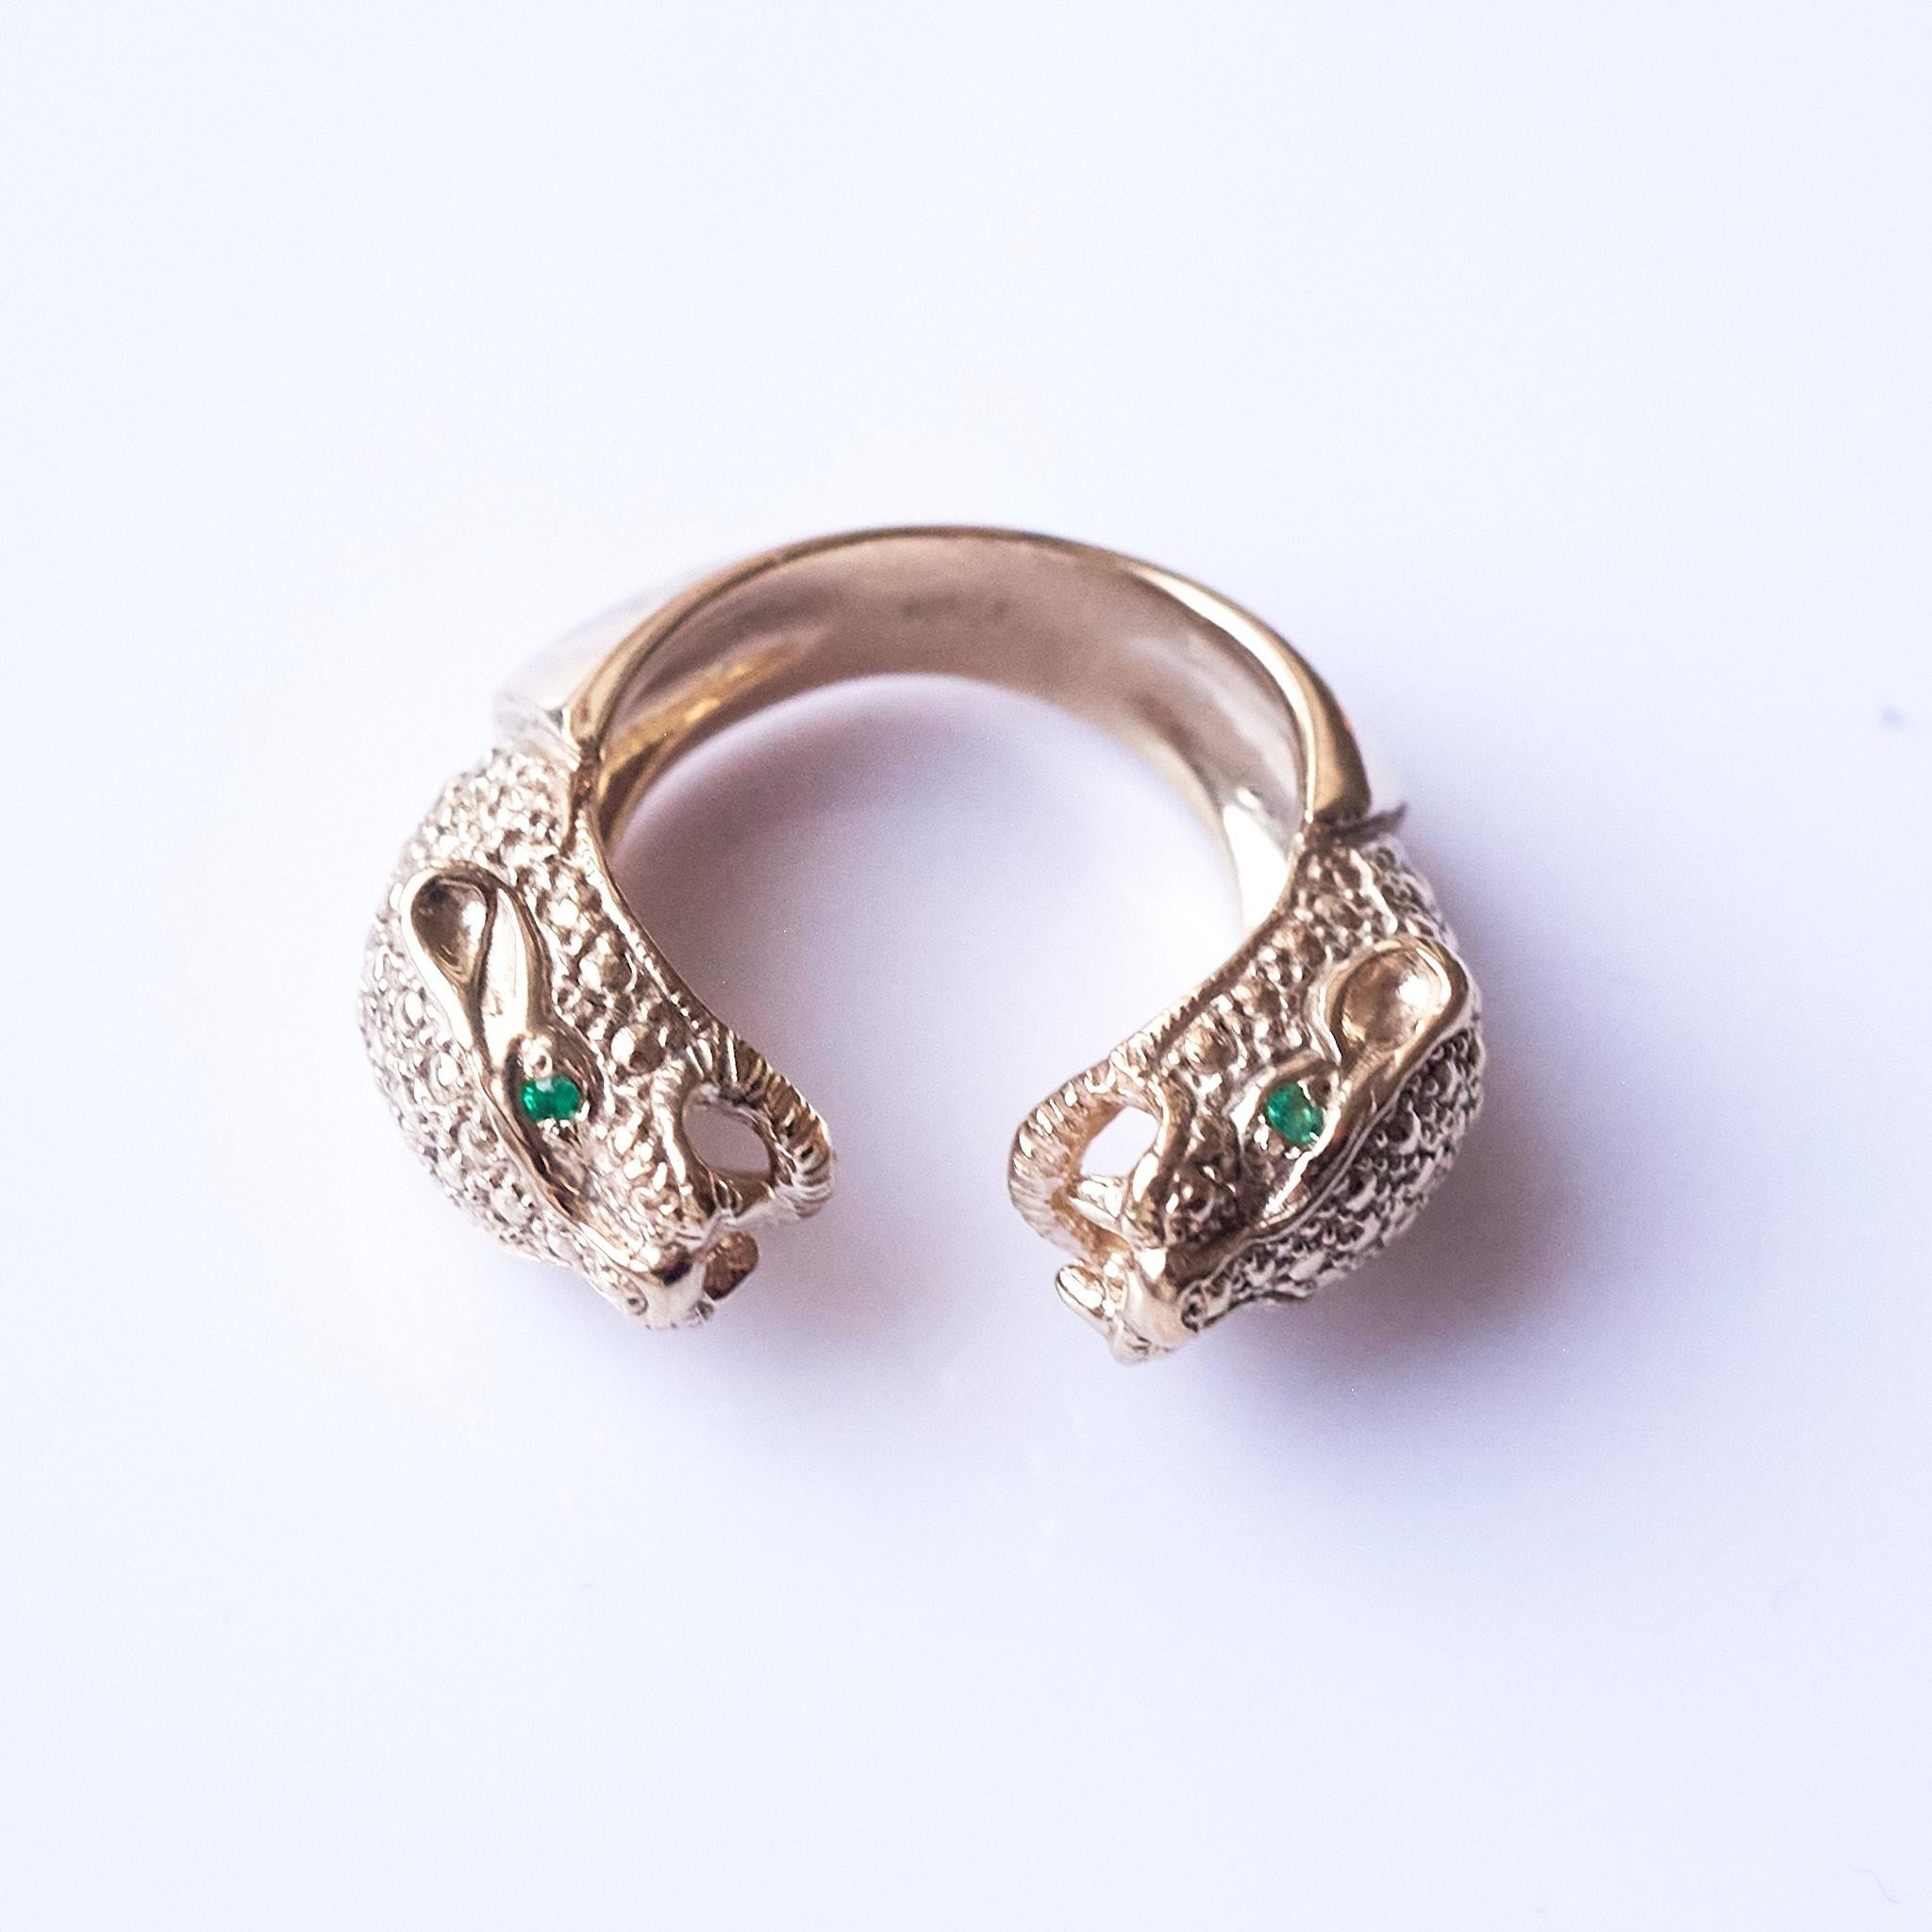 Early Victorian Emerald Jaguar Ring Bronze Animal Jewelry Cocktail Ring J Dauphin For Sale